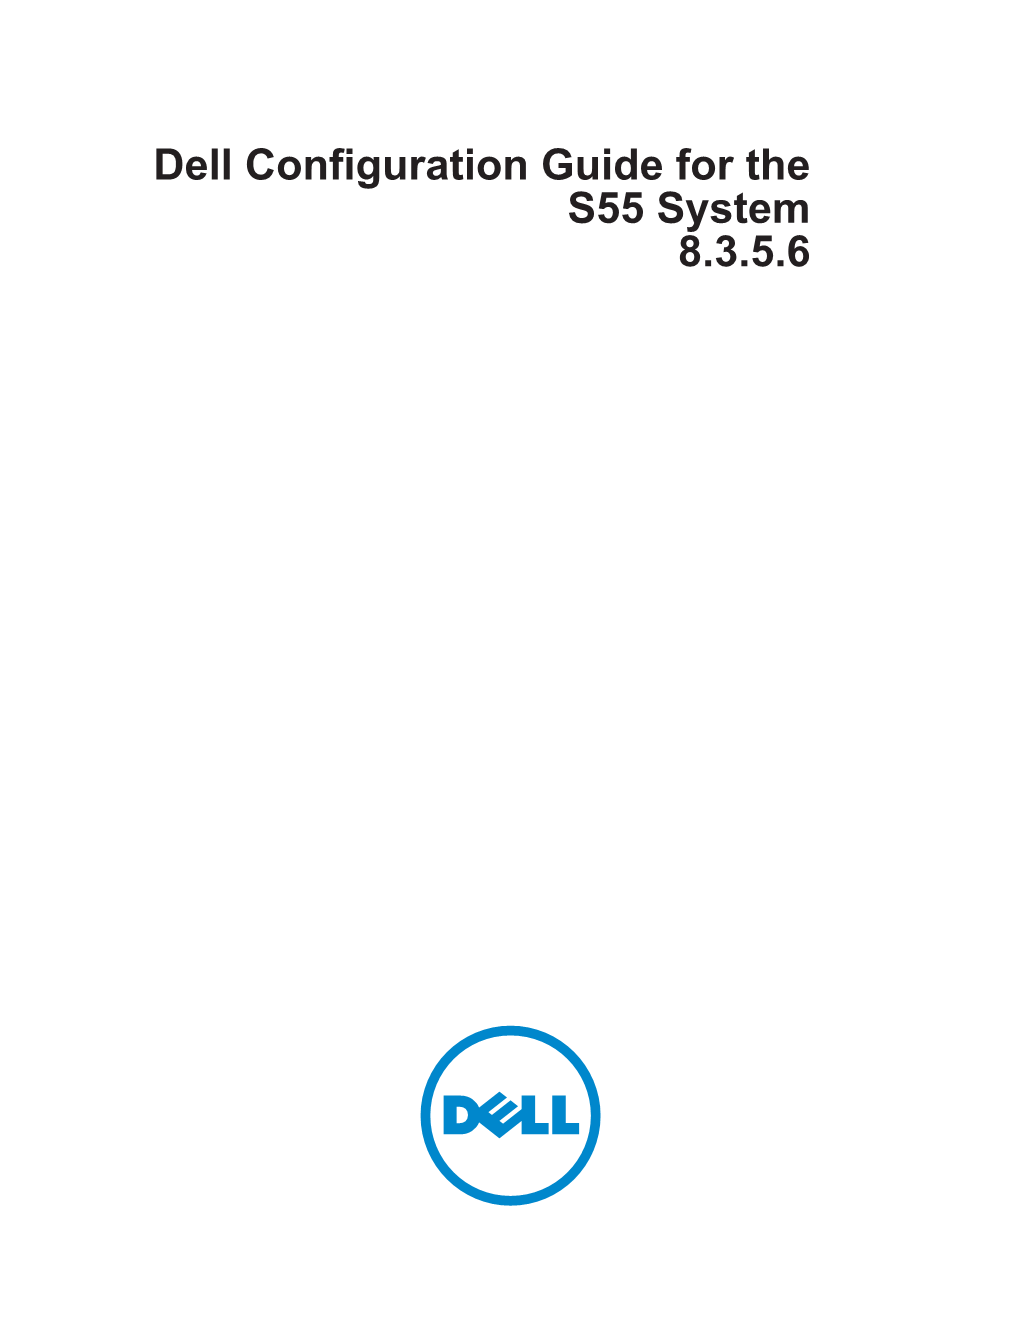 Dell 8.3.5.6 Configuration Guide for the S55 System